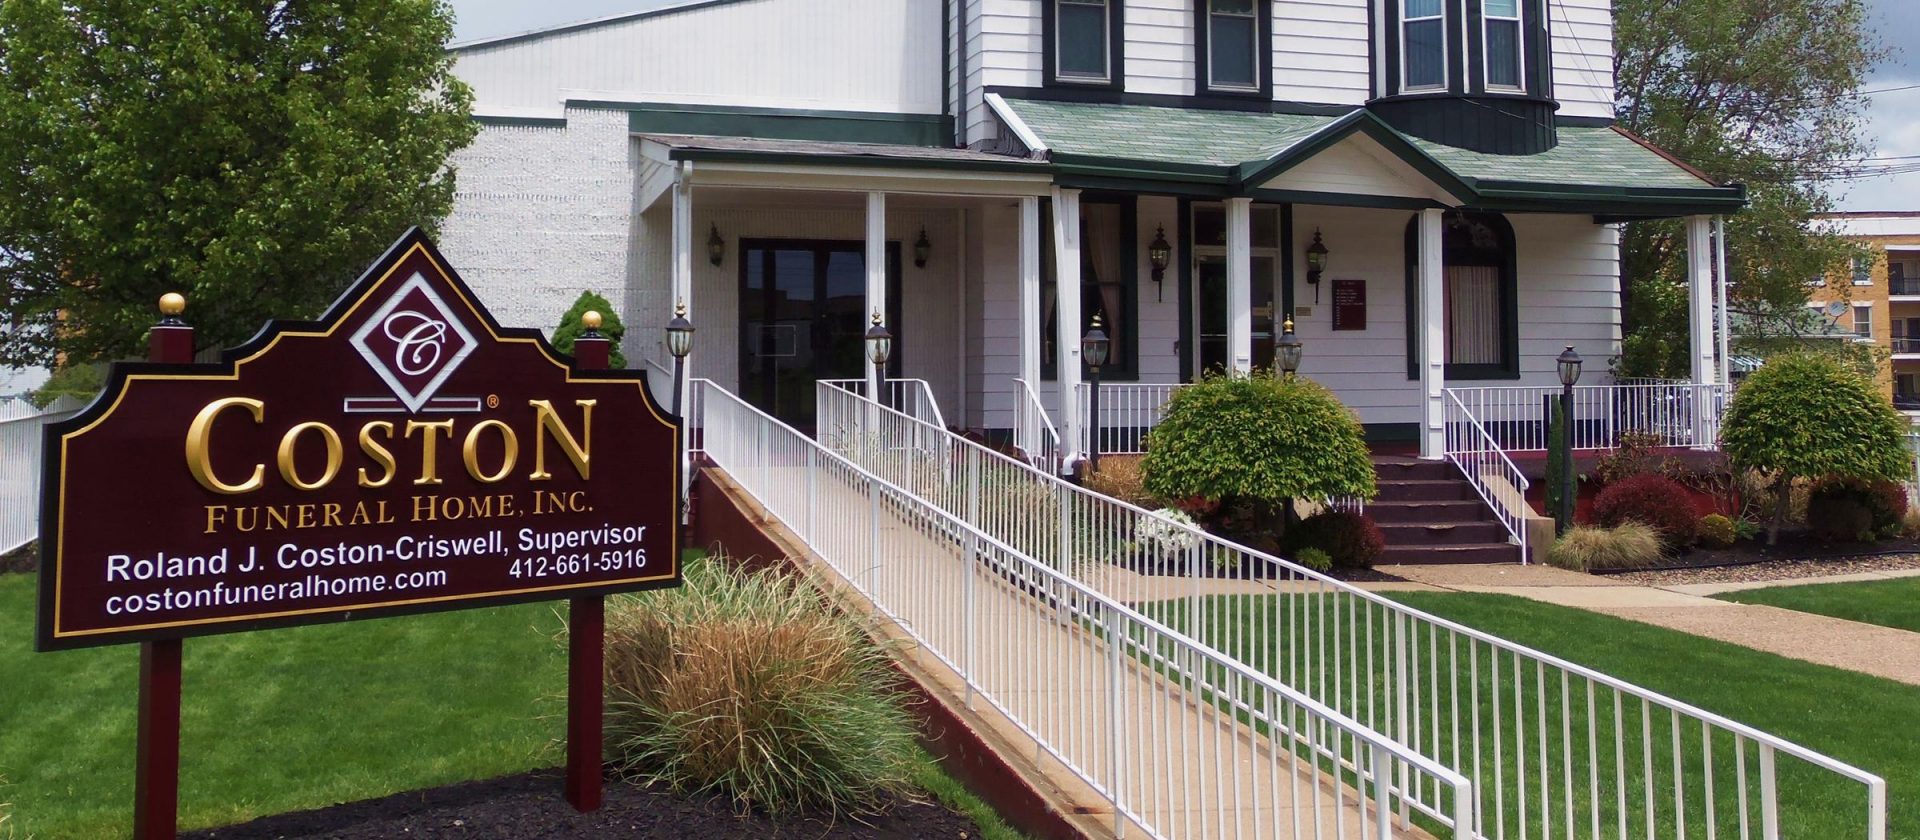 Coston Funeral Home's East Liberty location.